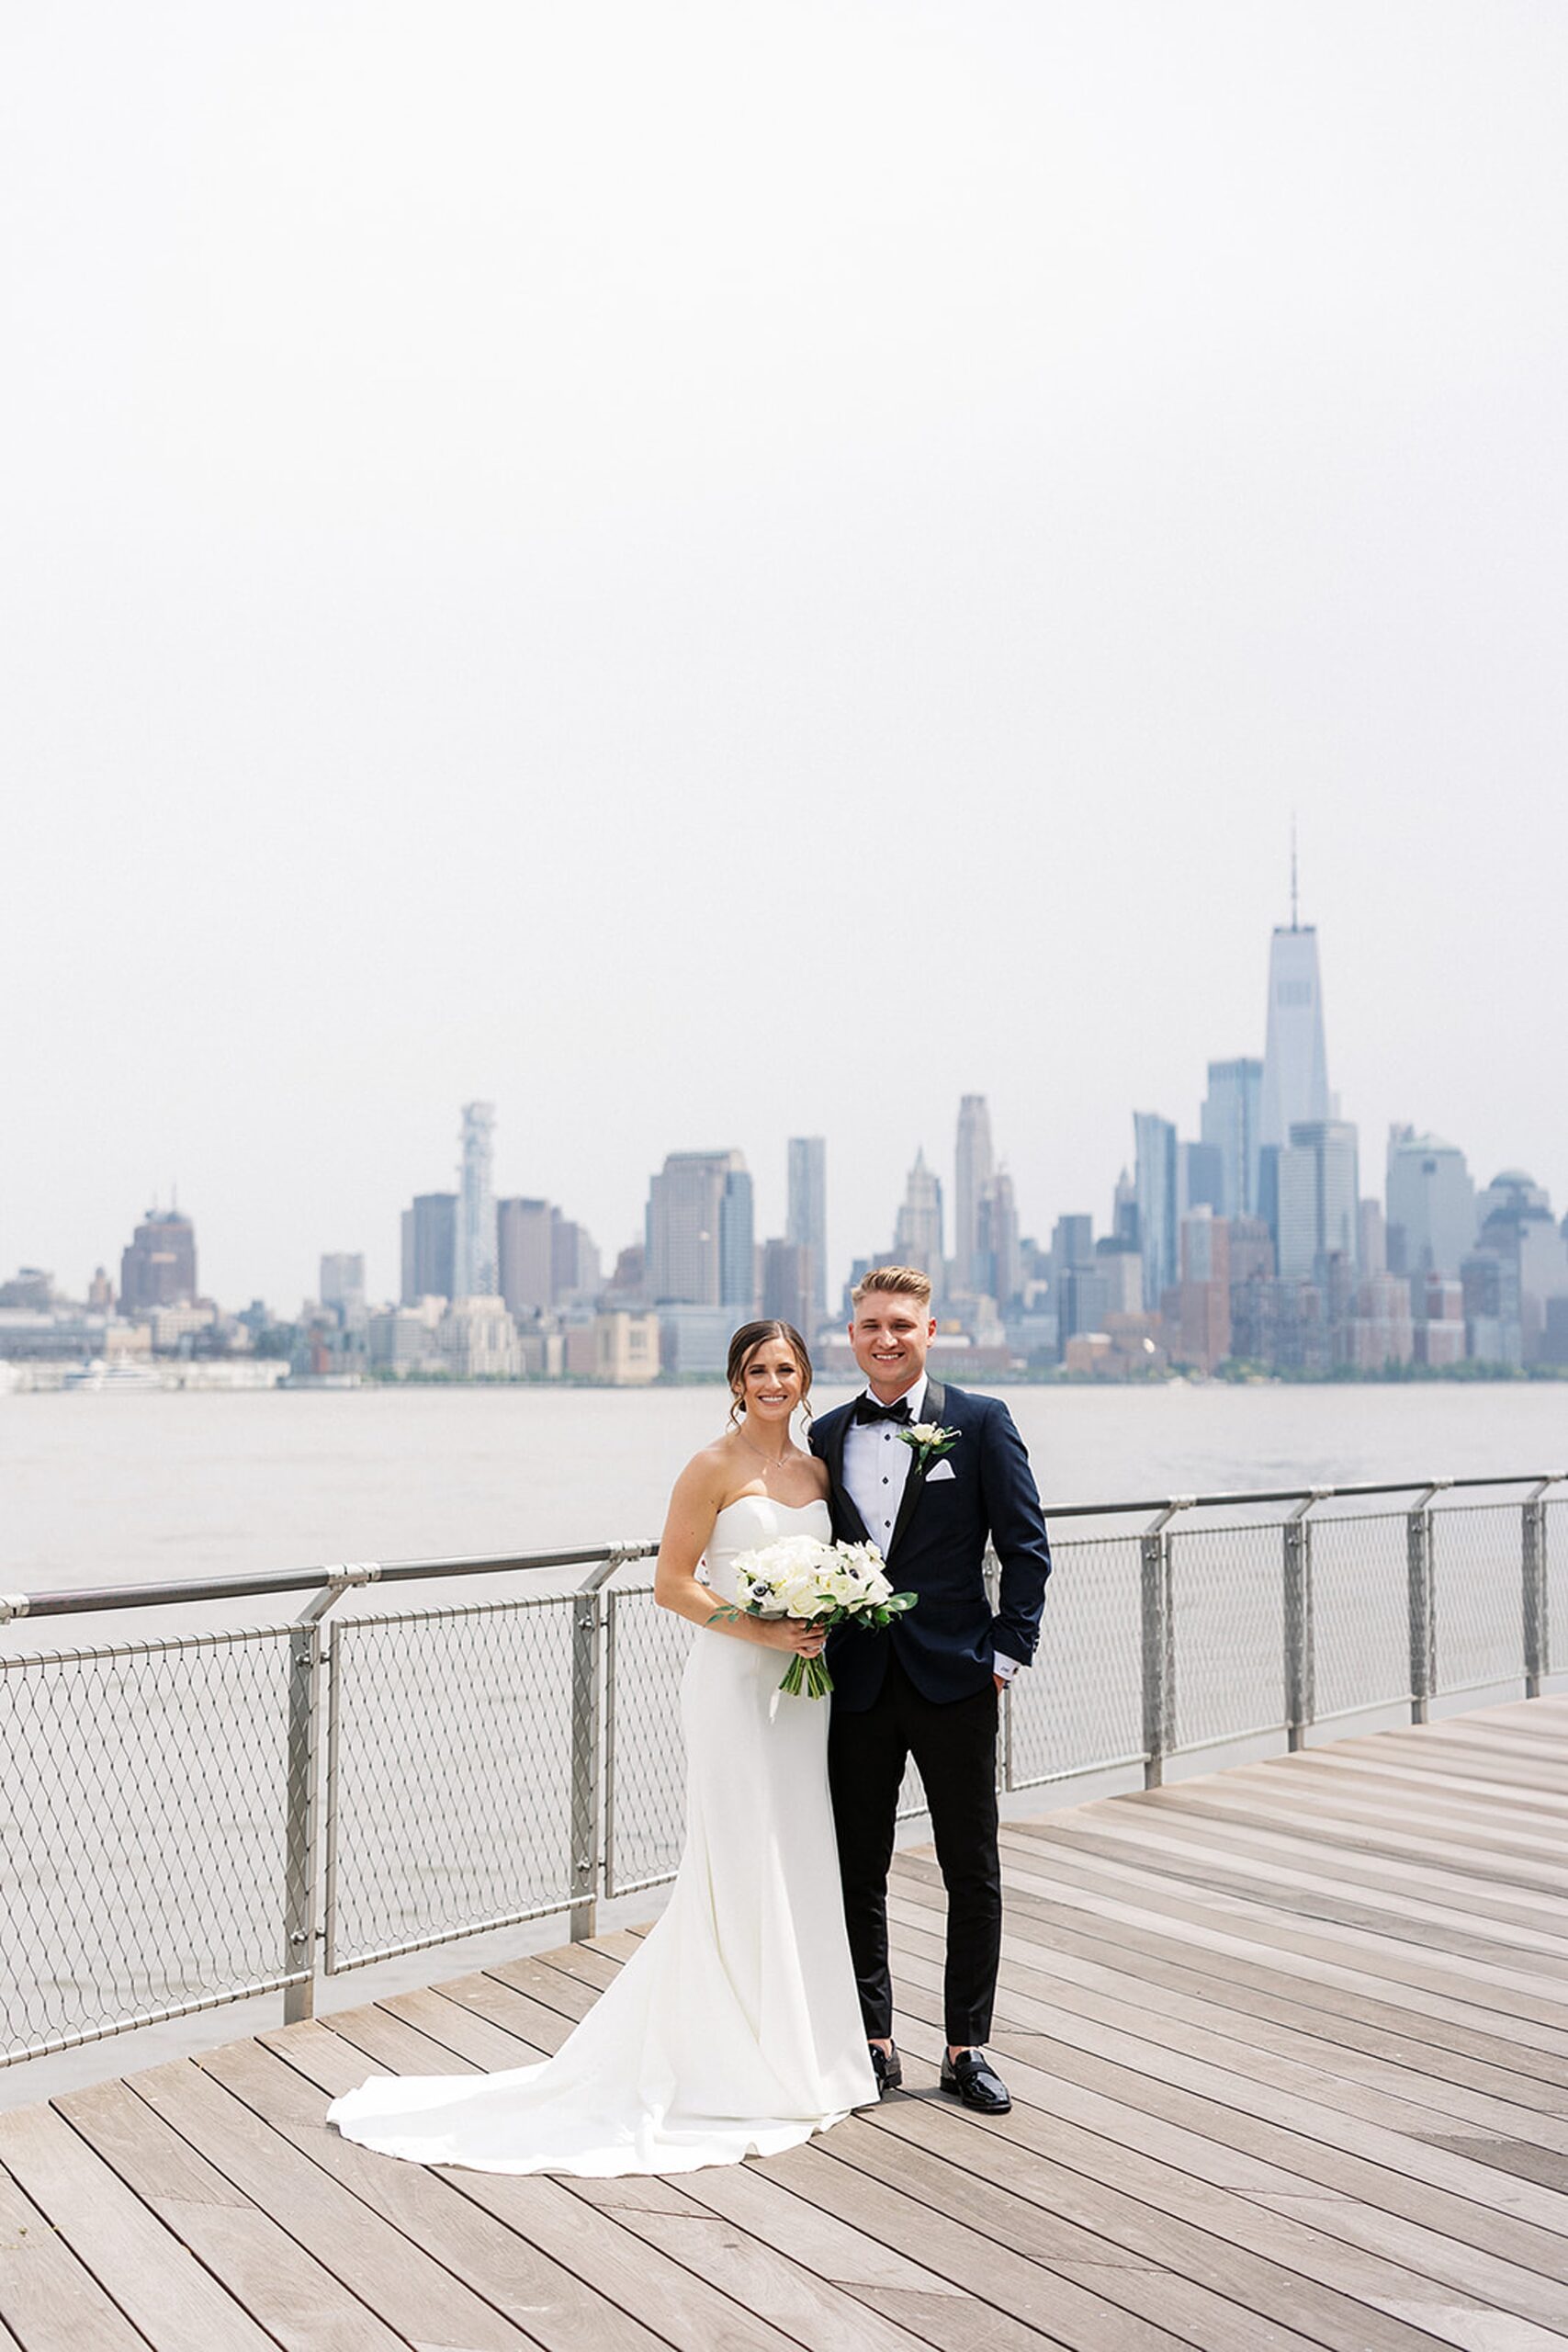 Newlyweds stand on a boardwalk in front of the Manhattan skyline